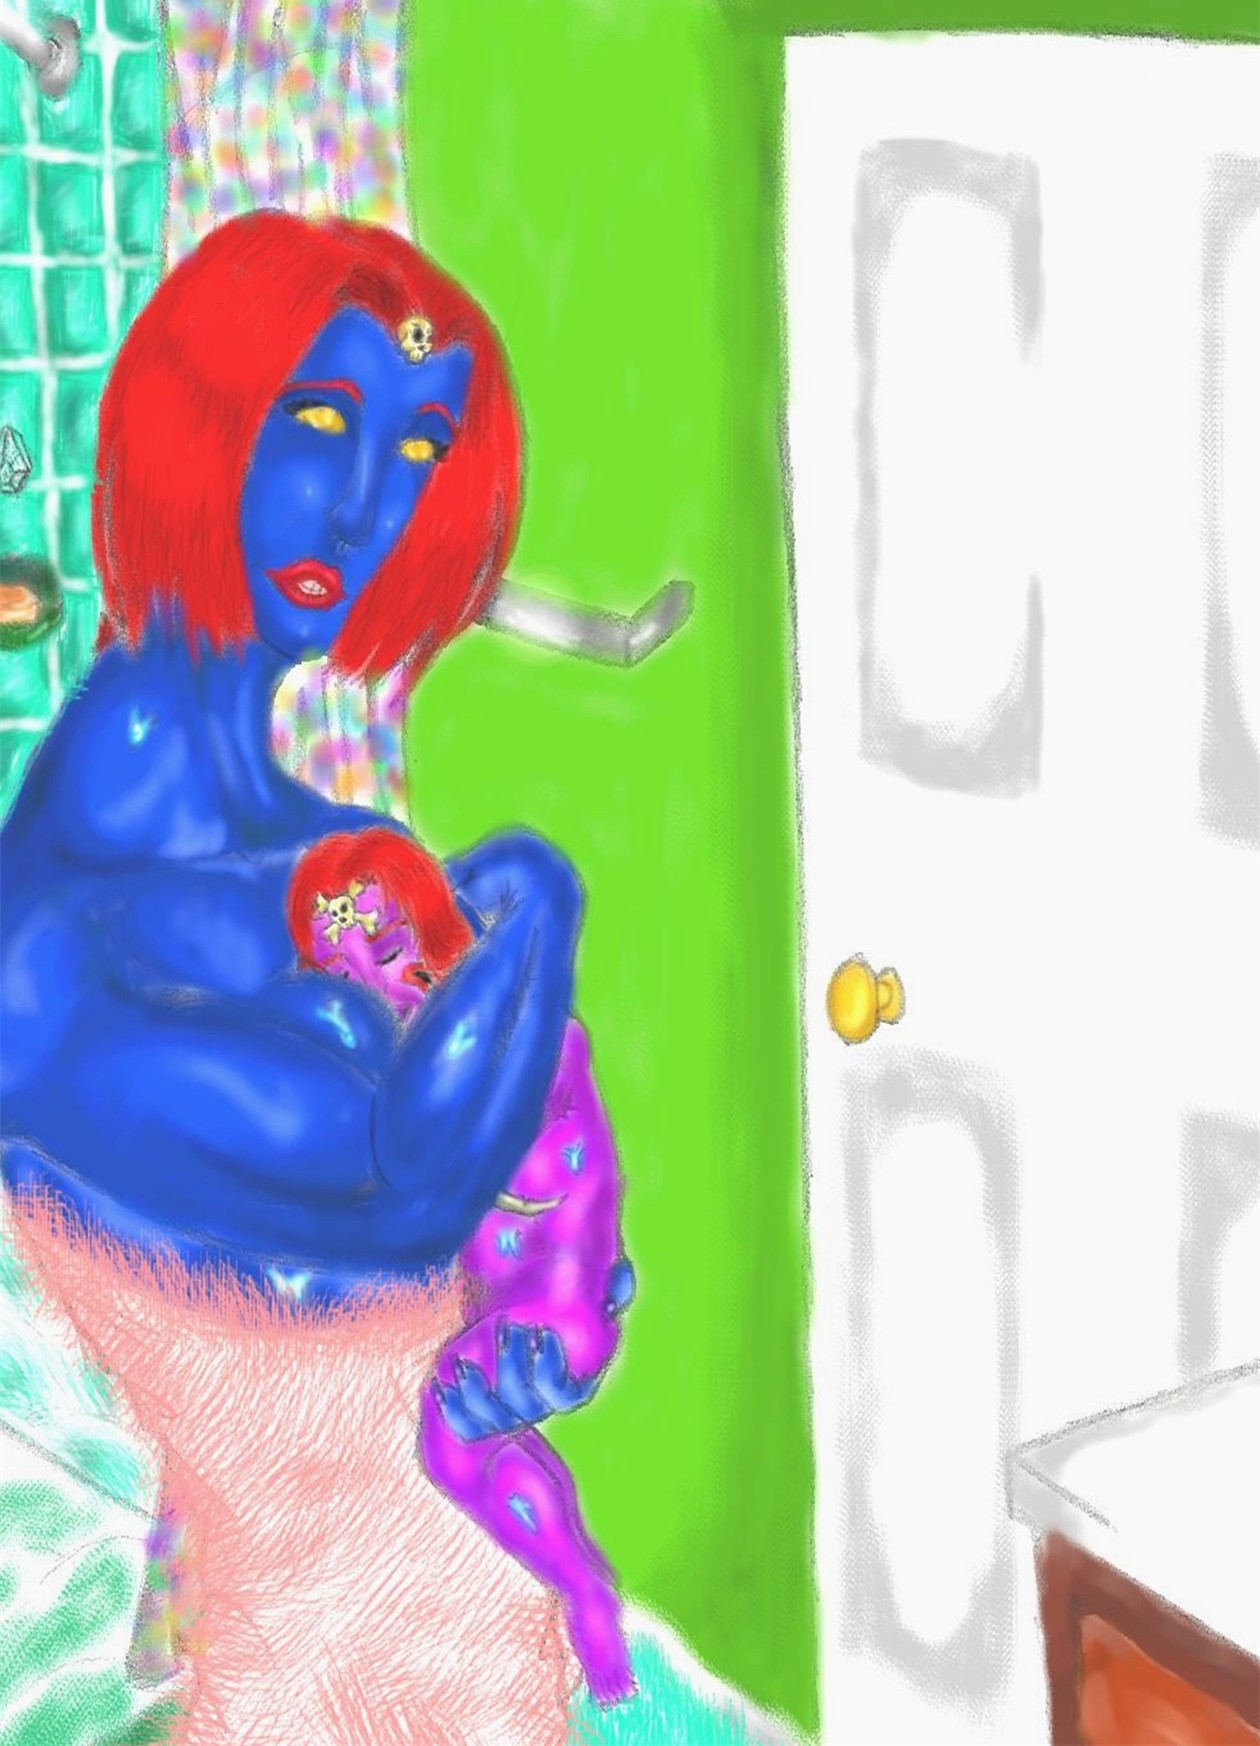 Mystique and her Baby by TheHellraiser